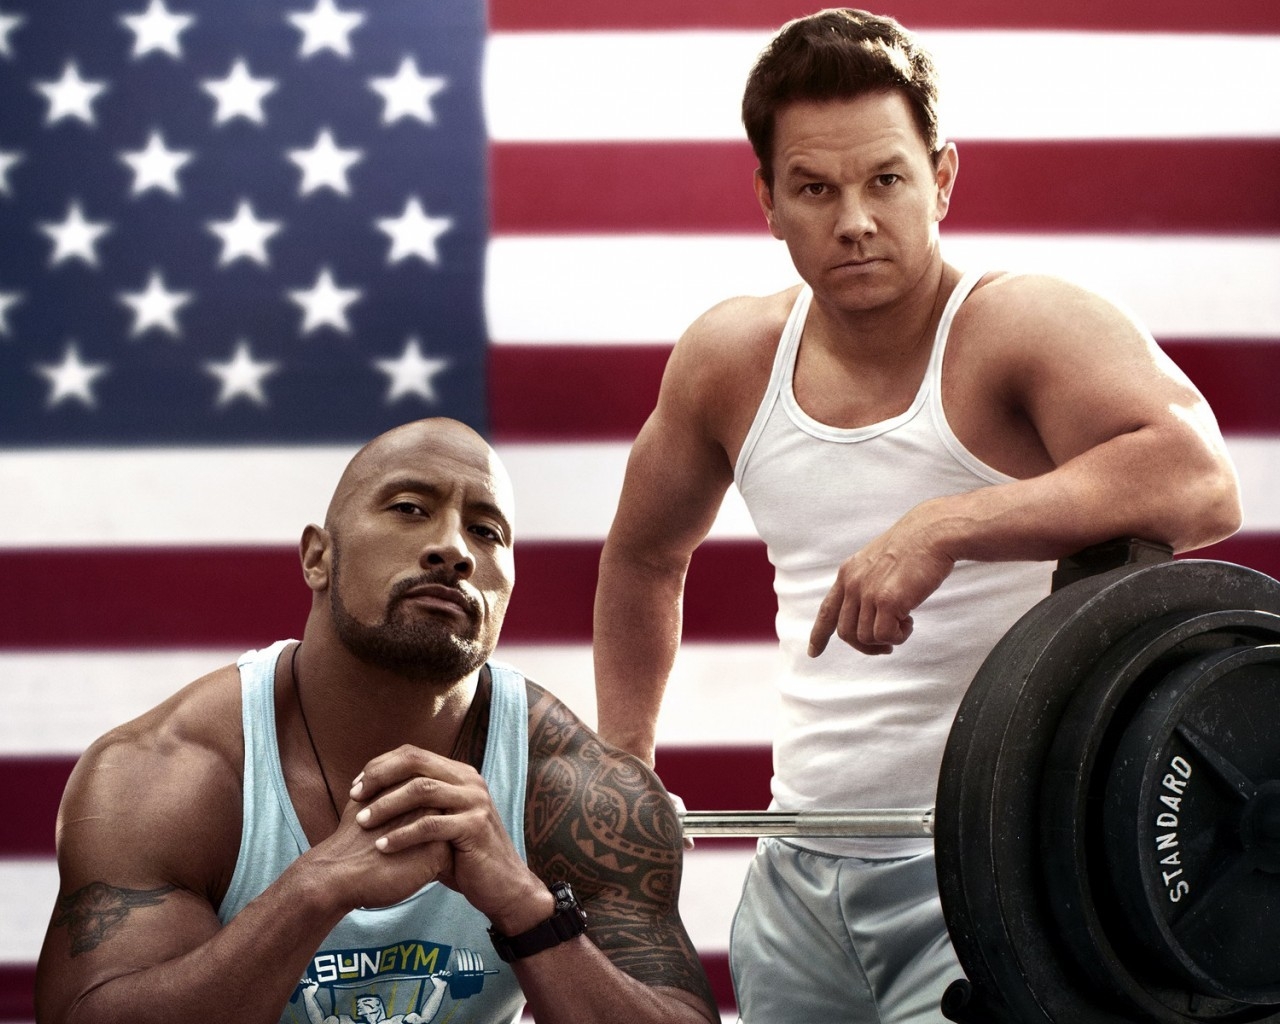 Pain & Gain for 1280 x 1024 resolution